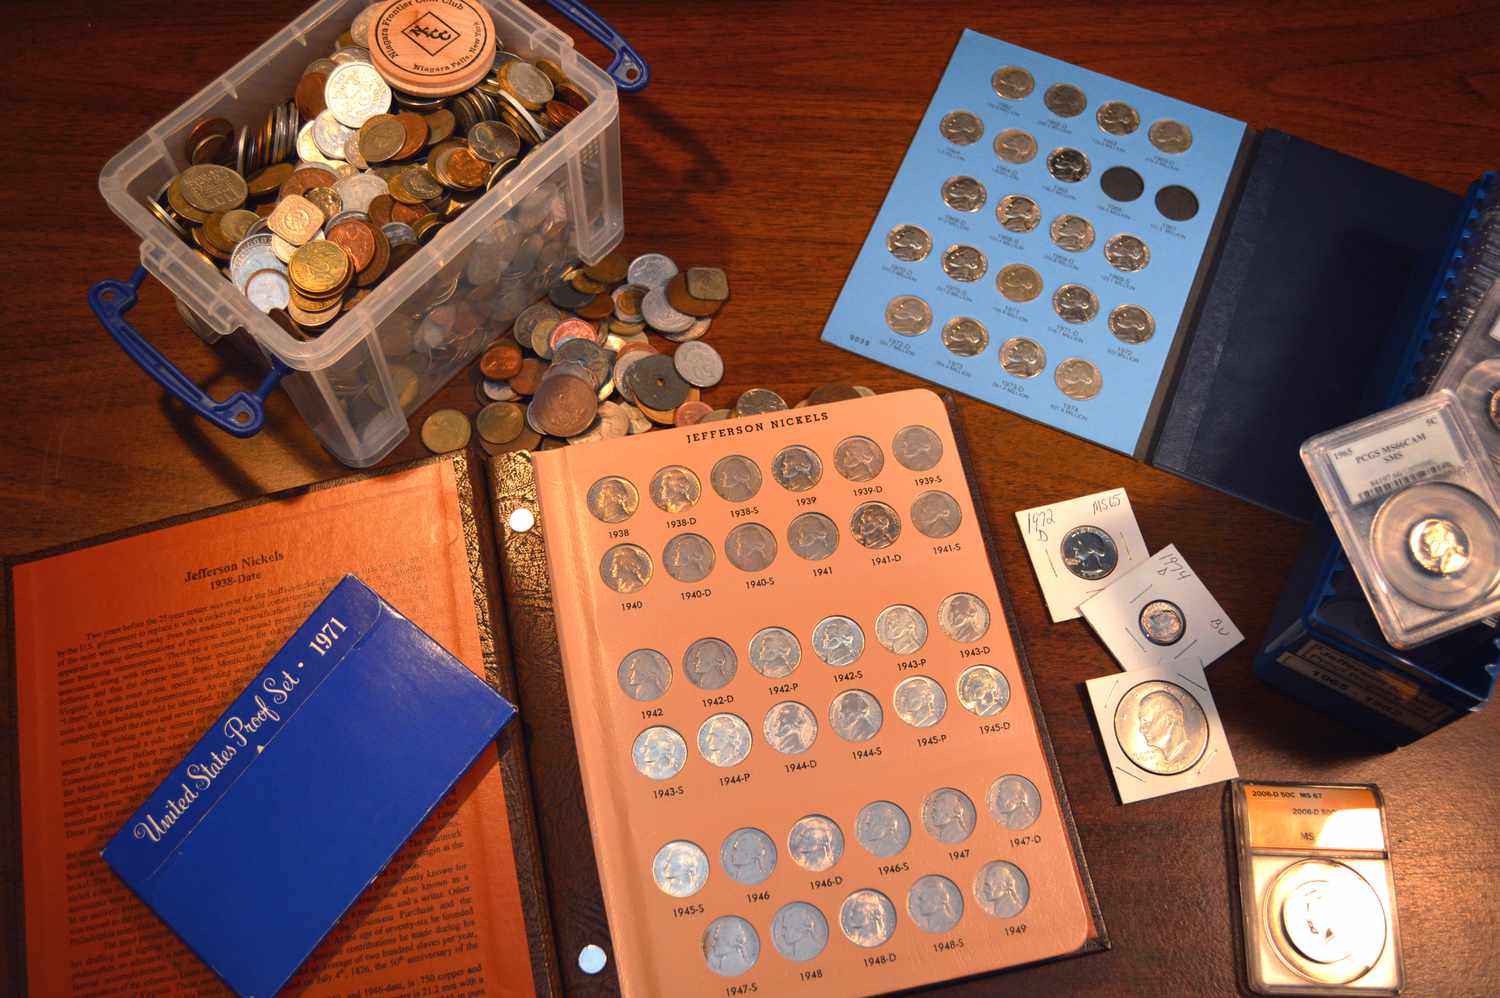 COIN BOOKS FOR COLLECTORS